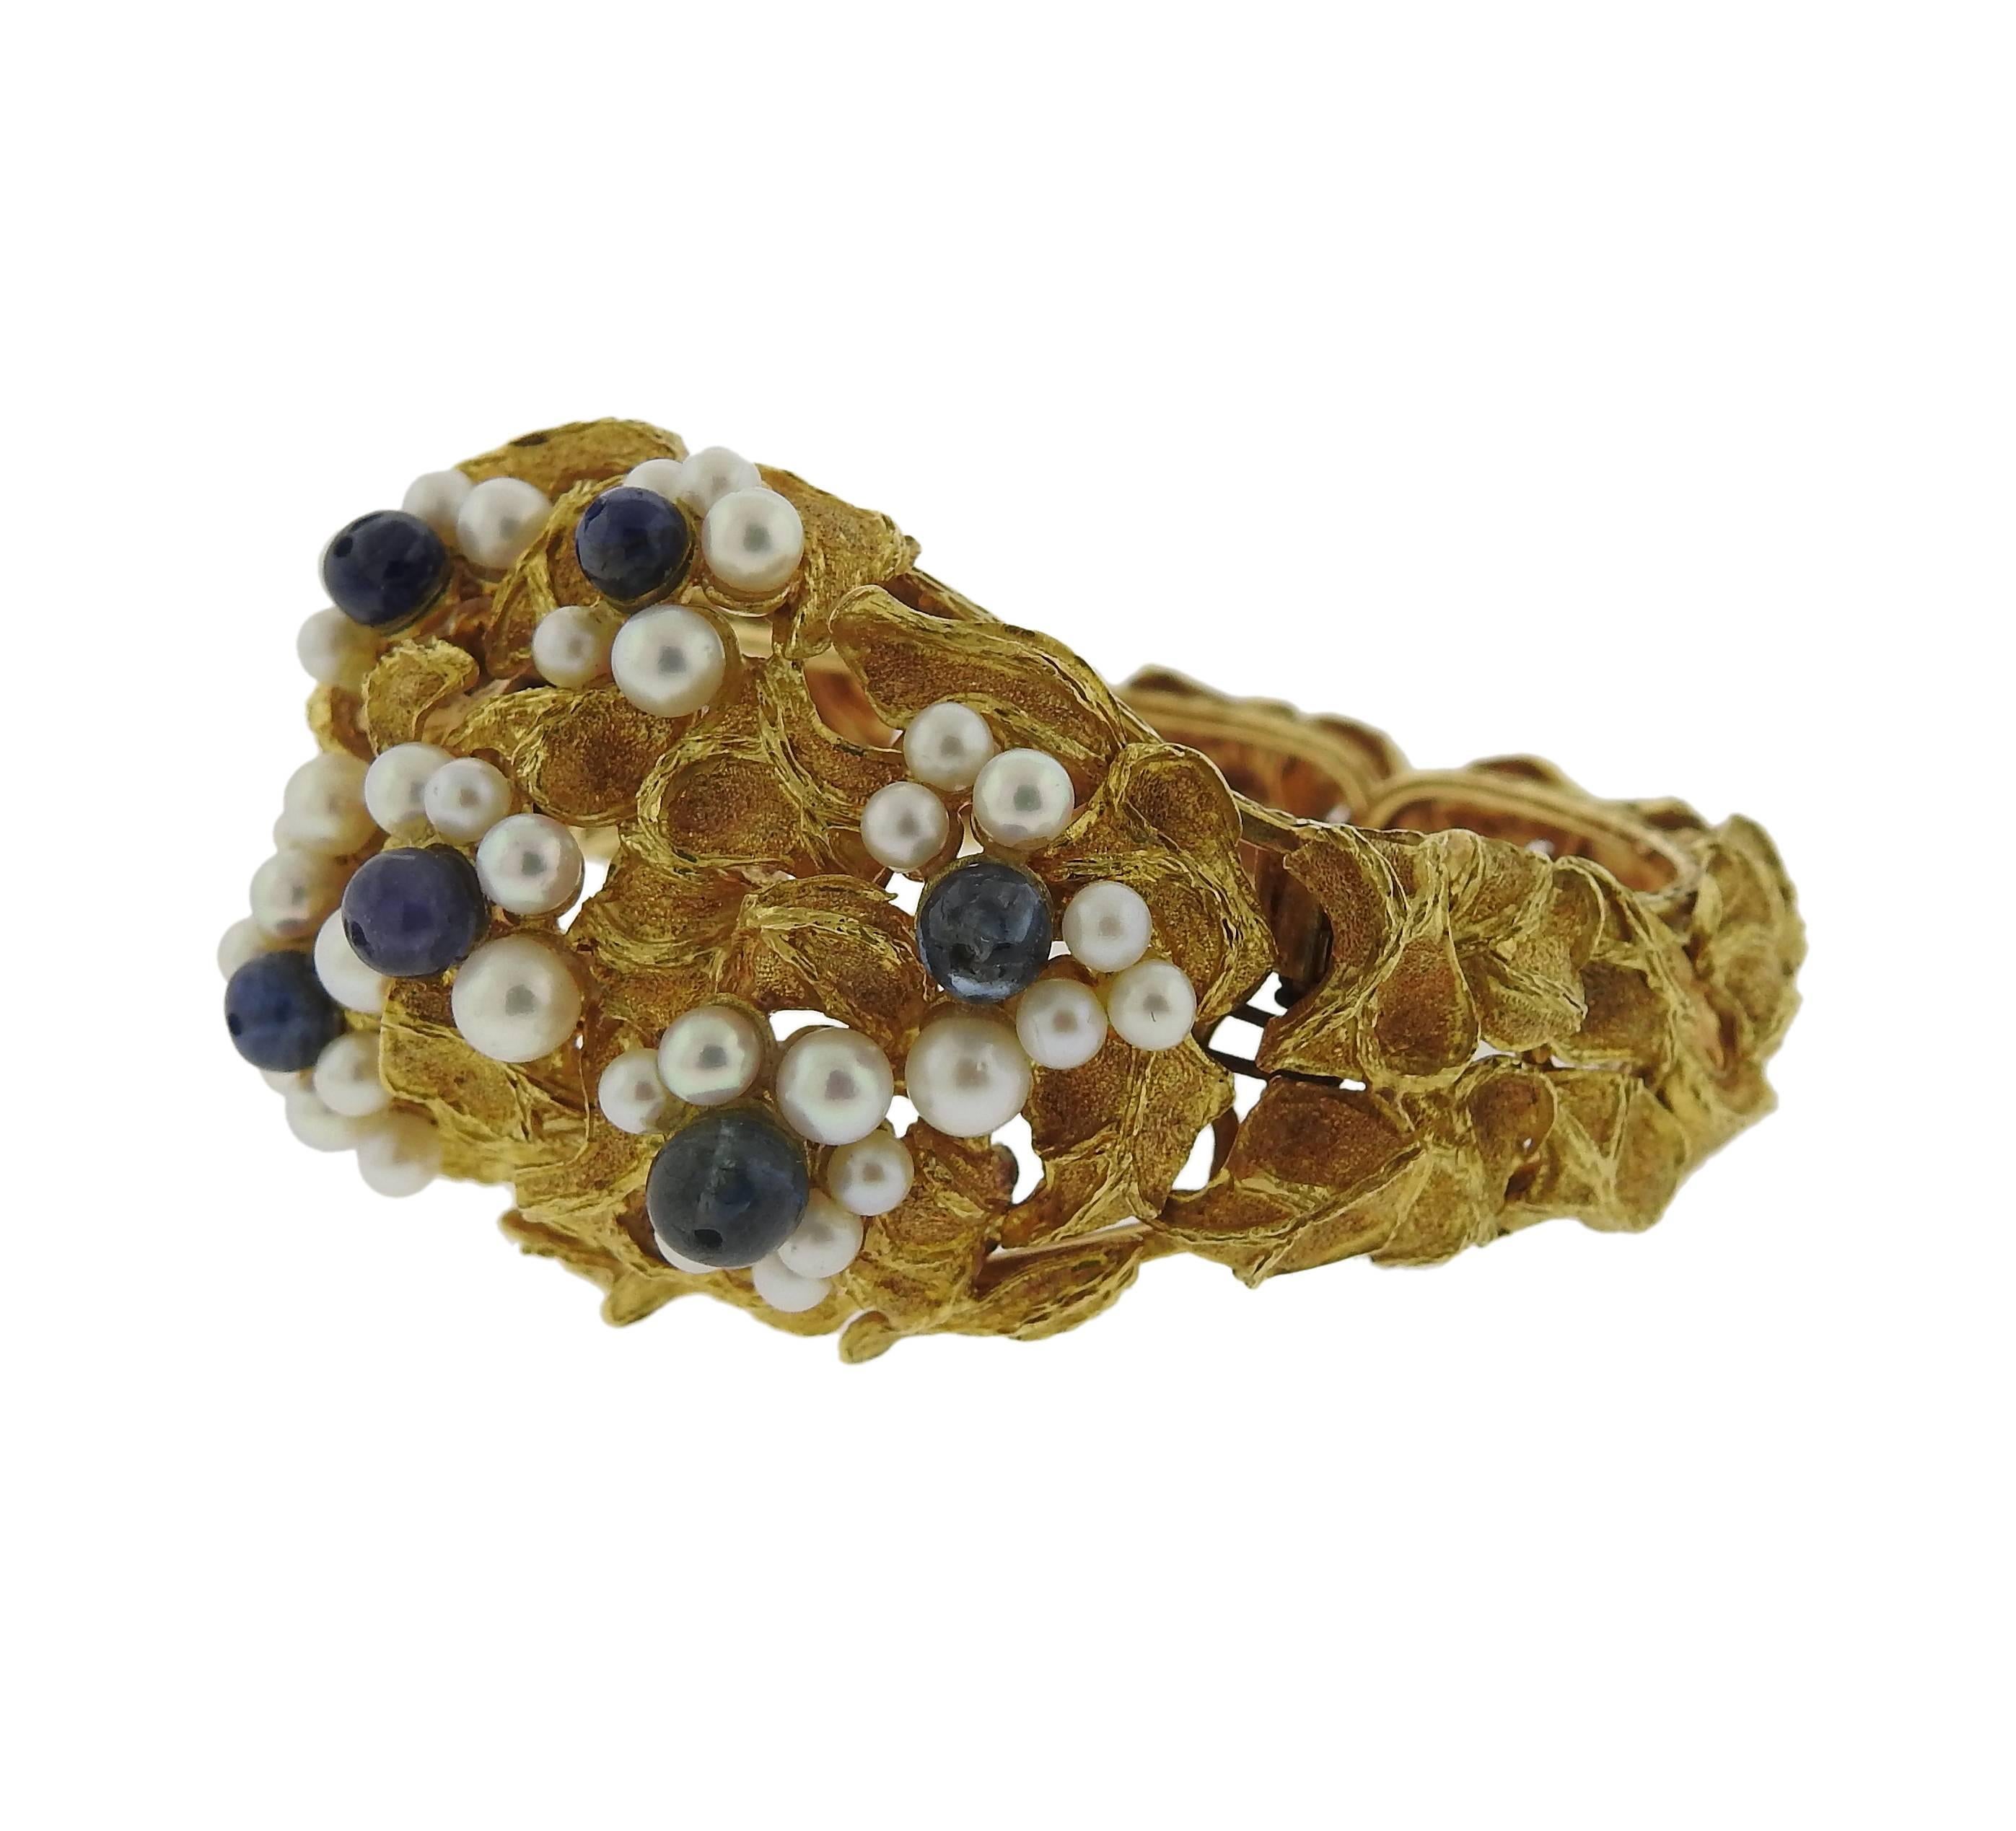 An 18k yellow gold bracelet, crafted by Green designer Ilias Lalaounis, featuring pearls and blue gemstones. Bracelet will fit up to 6 1/2" wrist and is 35mm wide at the widest point. Marked: A21, Greece, Maker's mark. Weight of the piece -